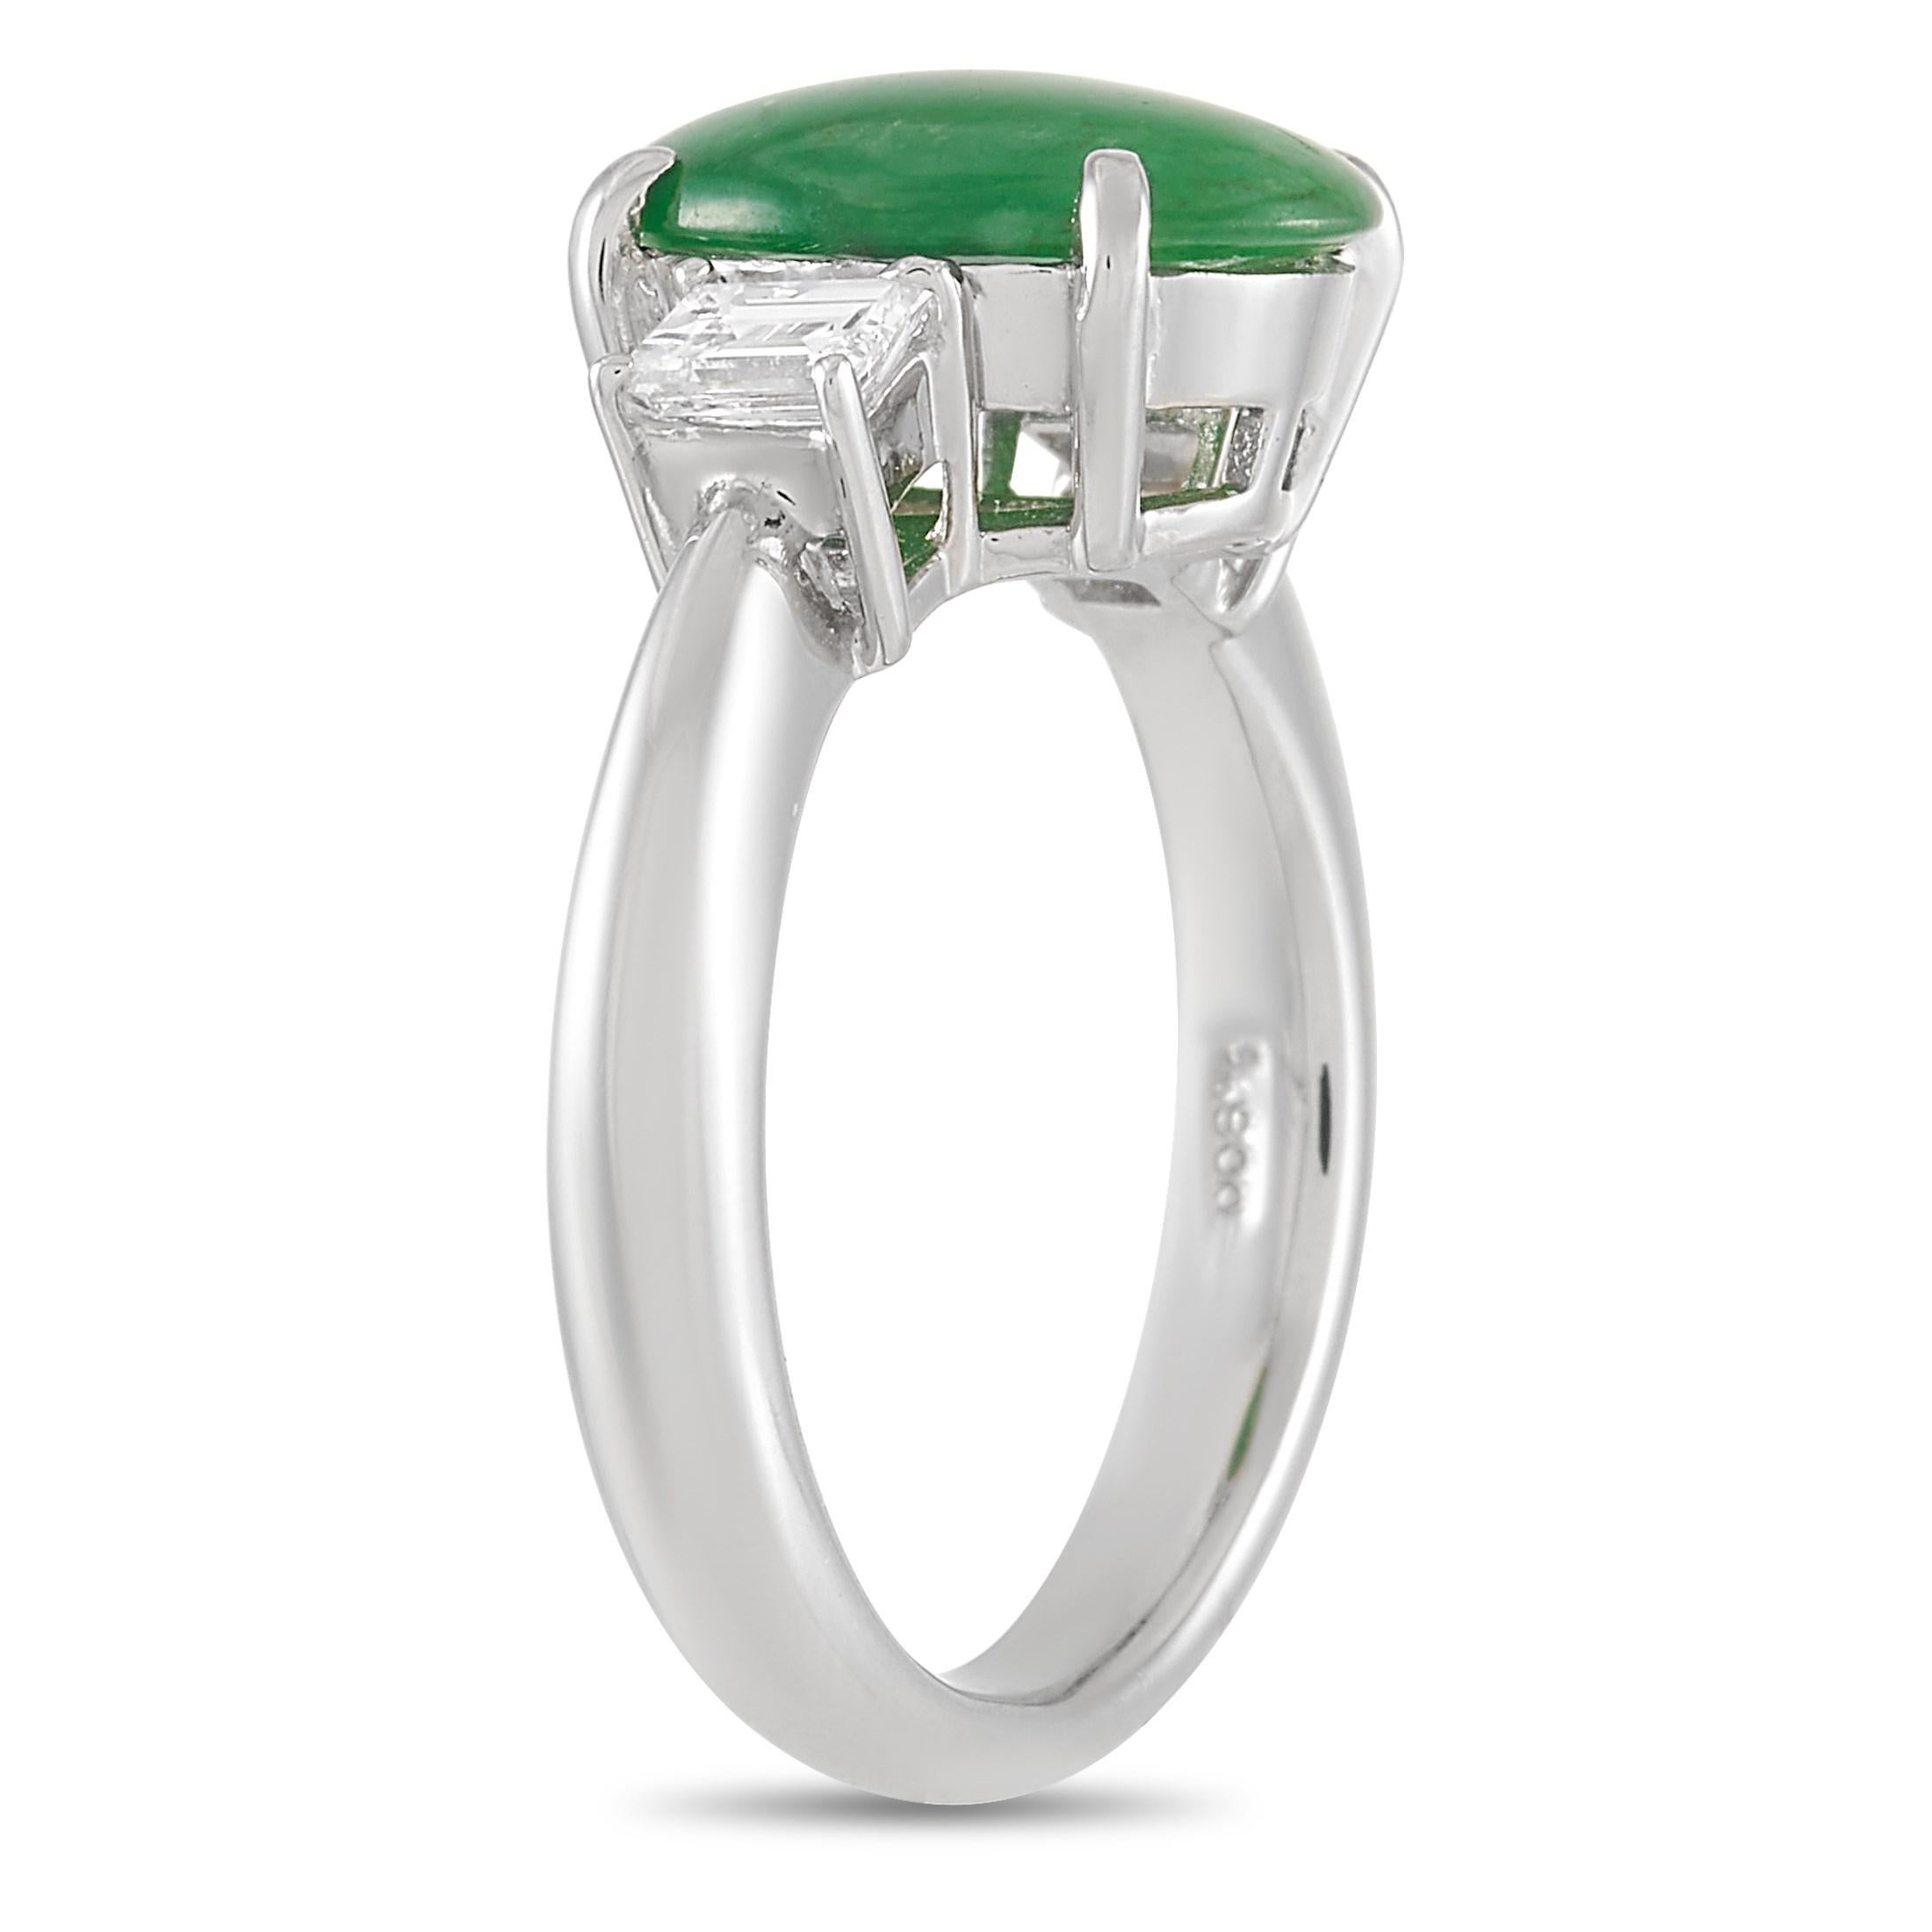 This classy LB Exclusive Platinum 0.51 ct Diamond 3.60 ct Jade Ring is simple but unique. The band is crafted of platinum and set with an oval 3.60 carat jade held in place by four prongs and flanked on either side by baguette diamonds totaling 0.51